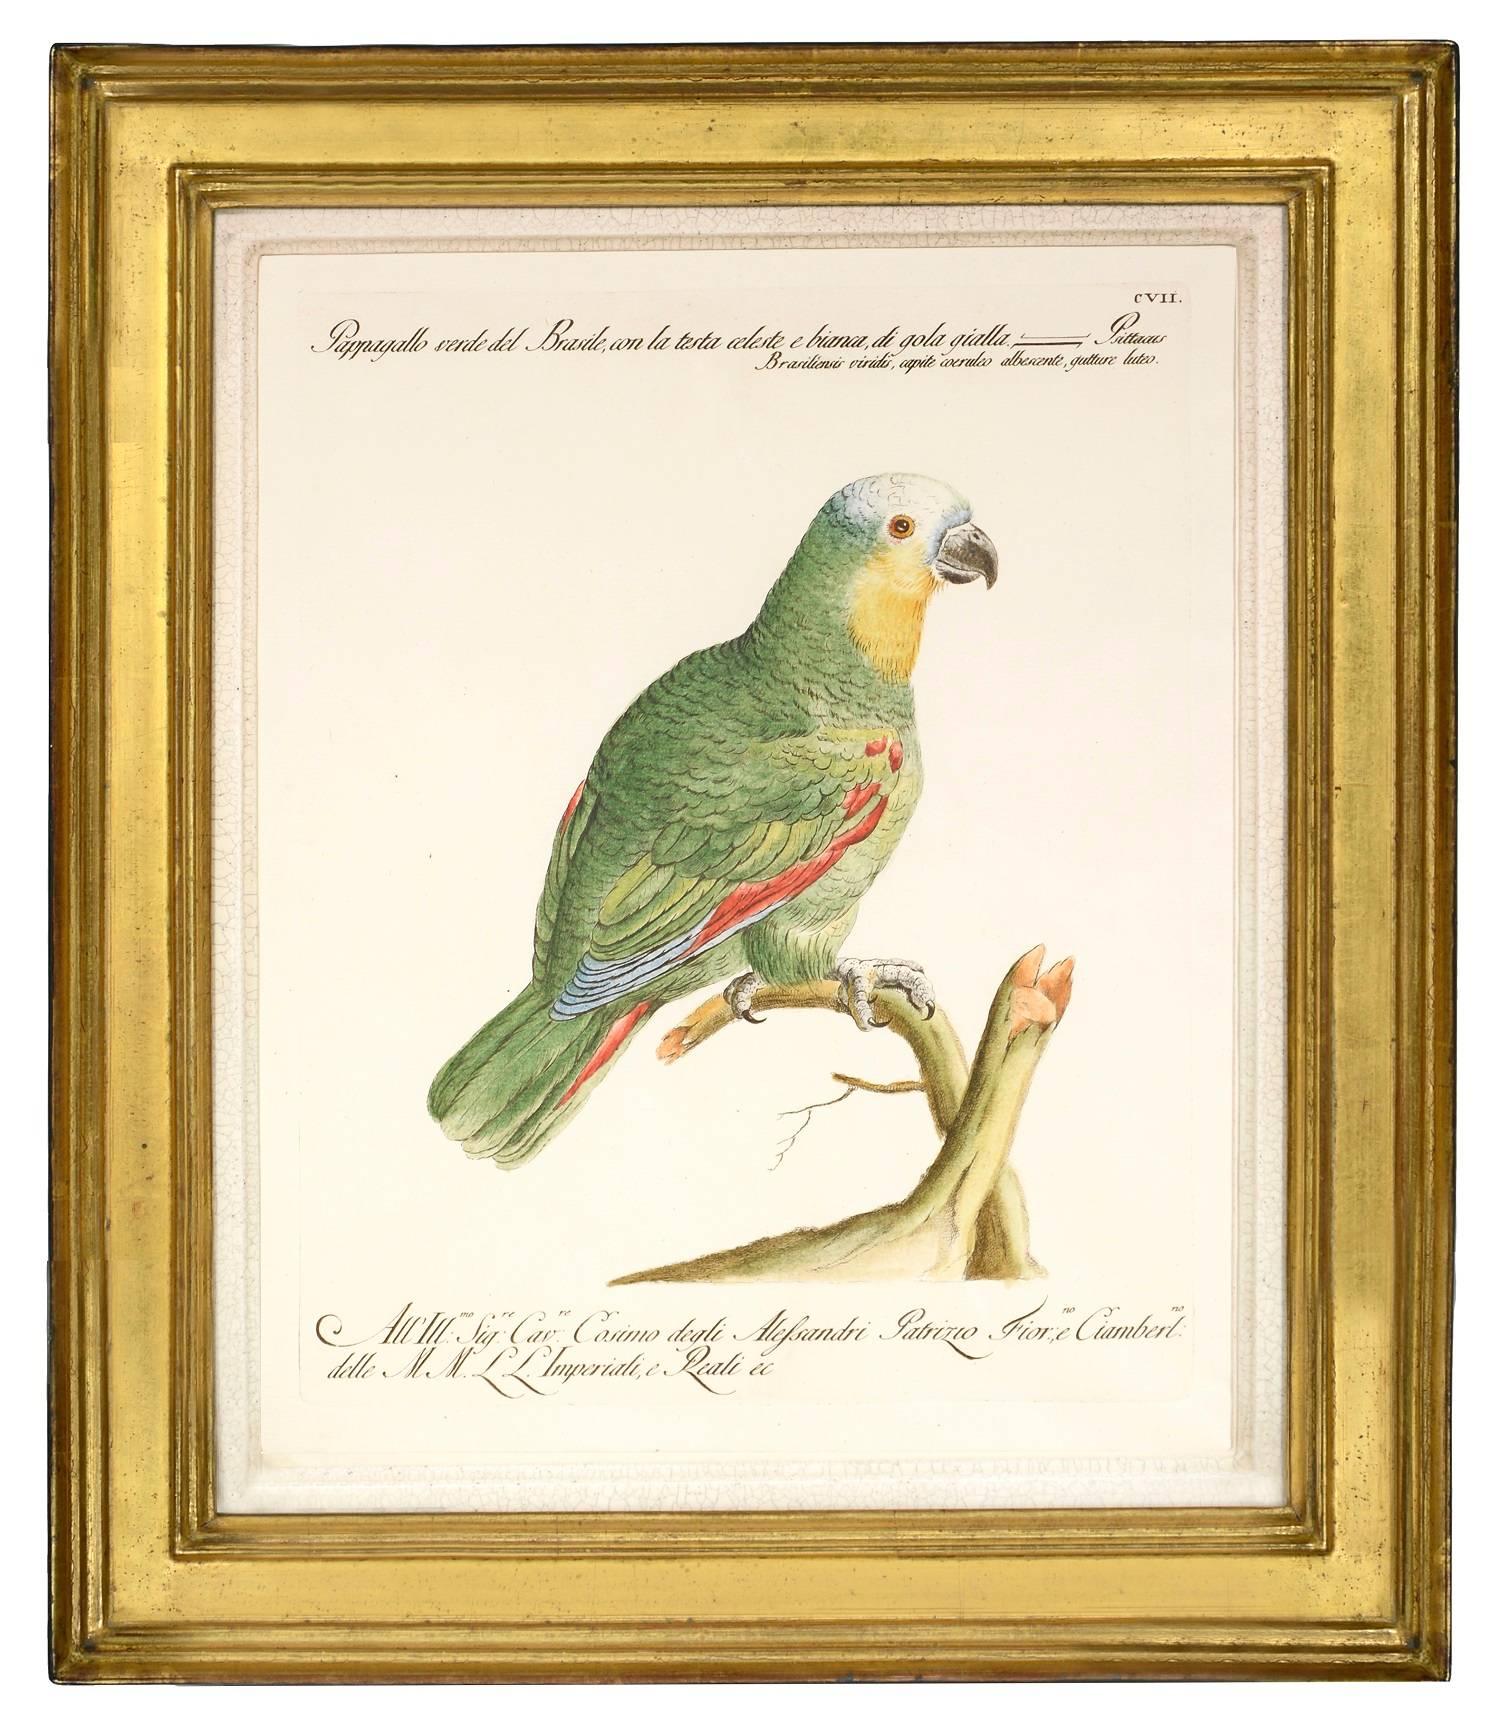 A Group of Nine Parrots. - Print by MANETTI, Saverio.